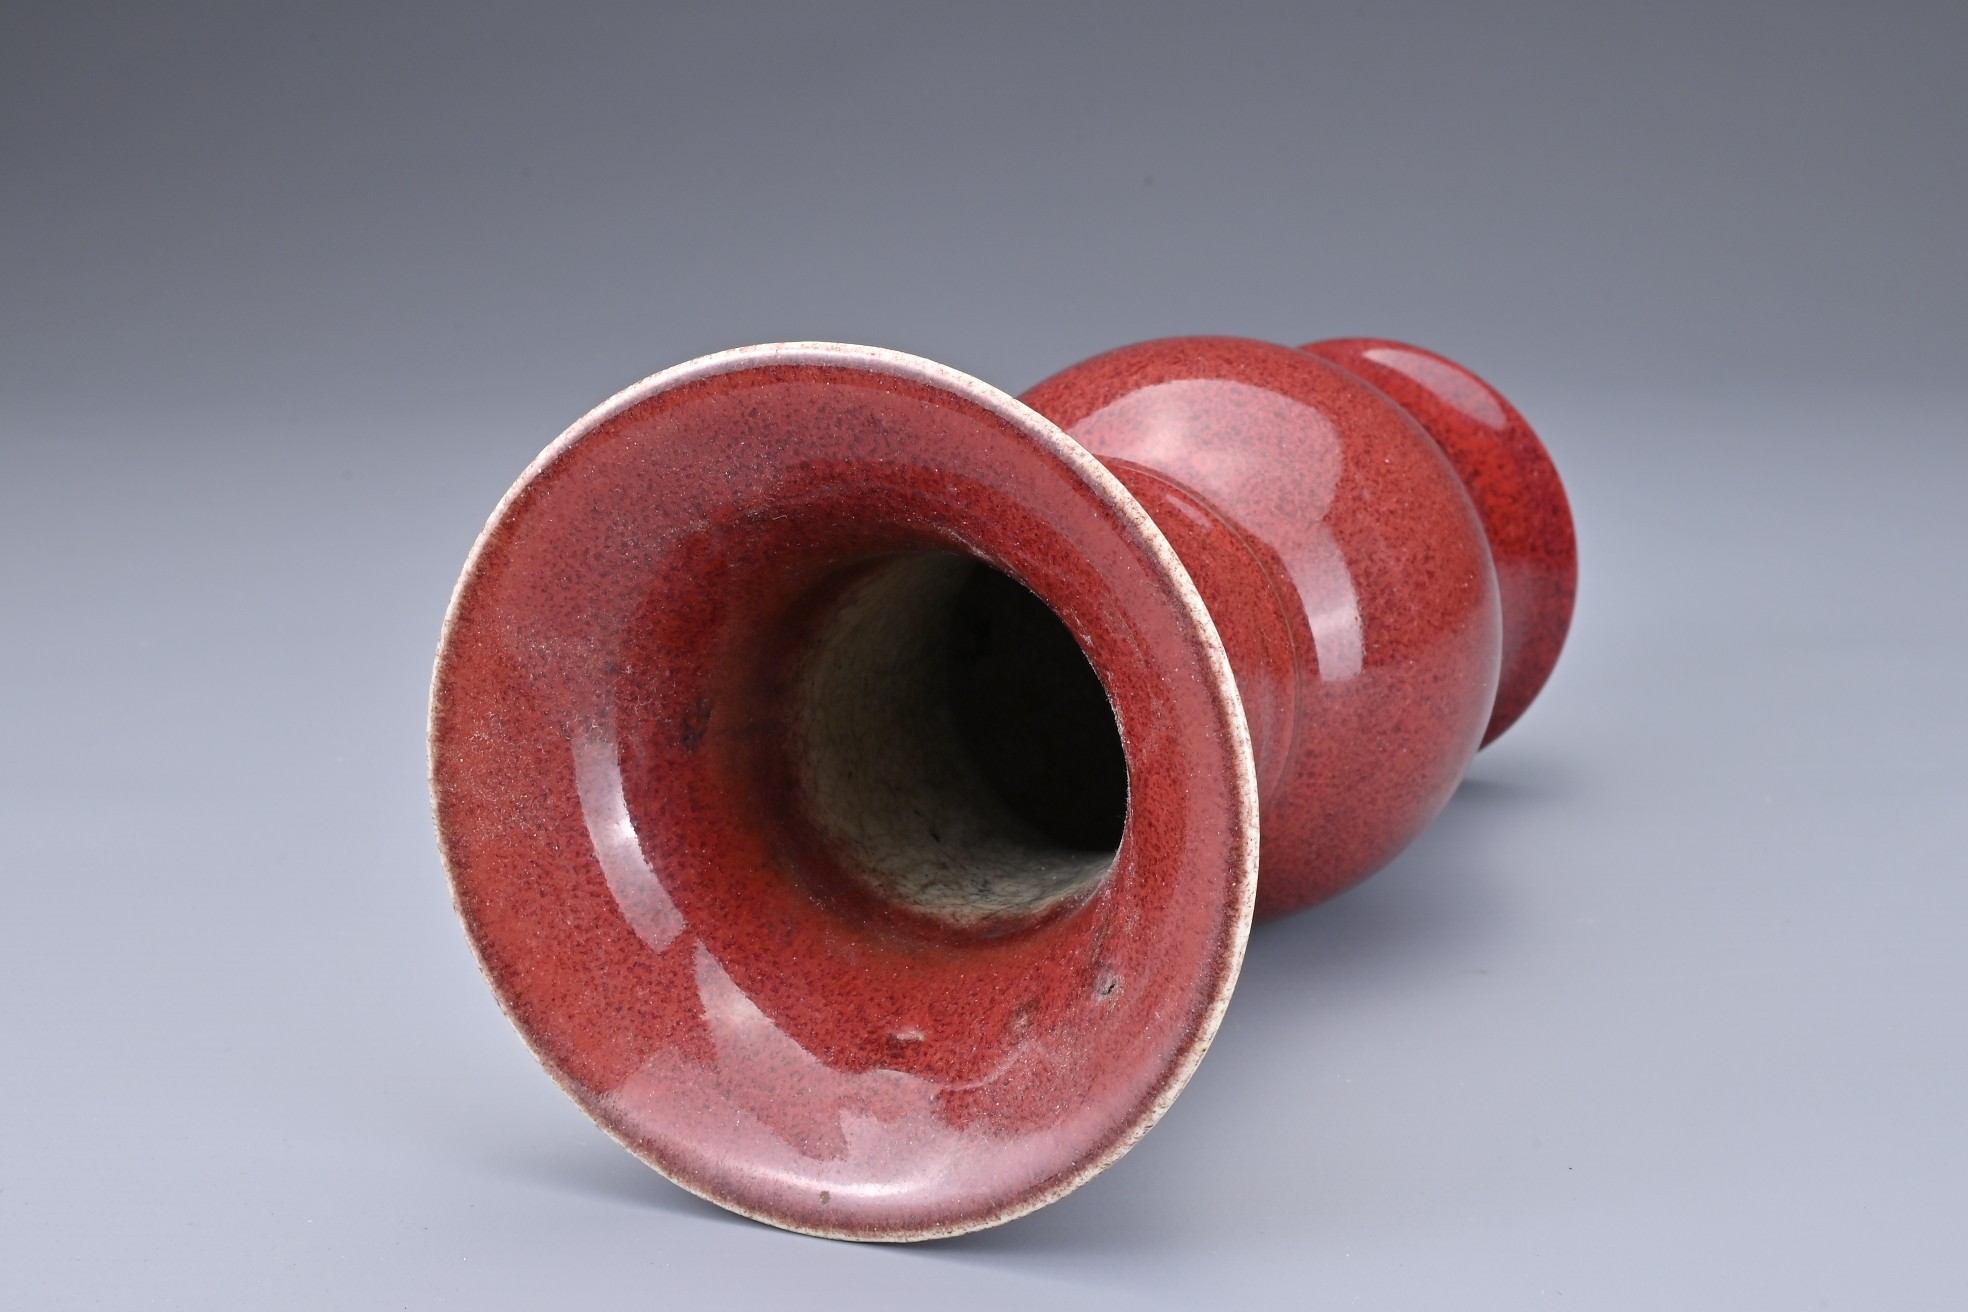 A CHINESE SANG-DE-BOEUF PORCELAIN GU-FORM BEAKER VASE. Covered in a dark red speckled glaze thinning - Image 7 of 7